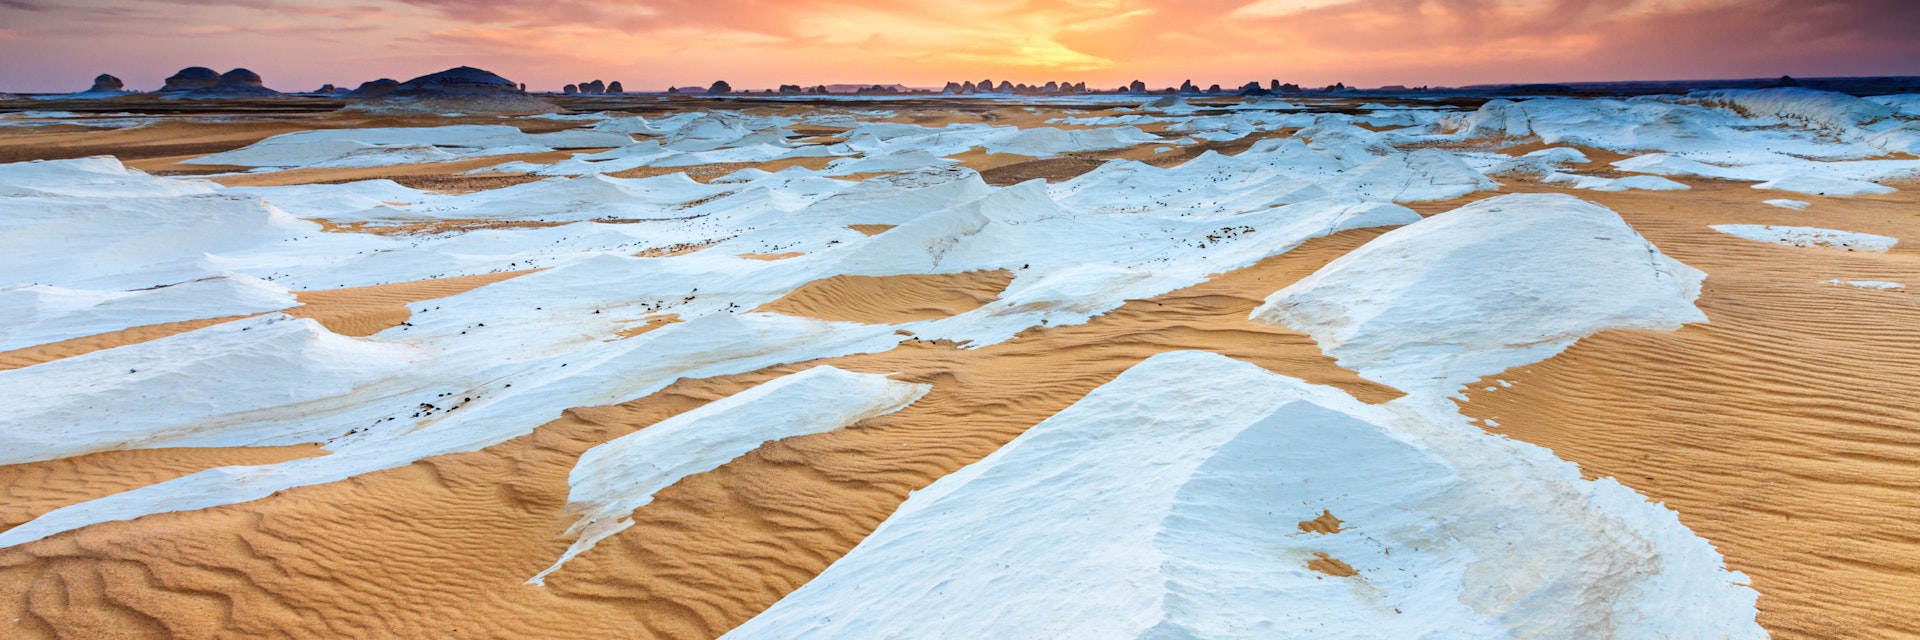 "Sunset over  The White Desert, part of The Western Sahara Desert in Egypt. The White Desert of Egypt is located 45 km (28 mi) north of the town of Farafra. The desert has a white, cream color and has massive chalk rock formations that have been created as a result of occasional sandstorm in the area."